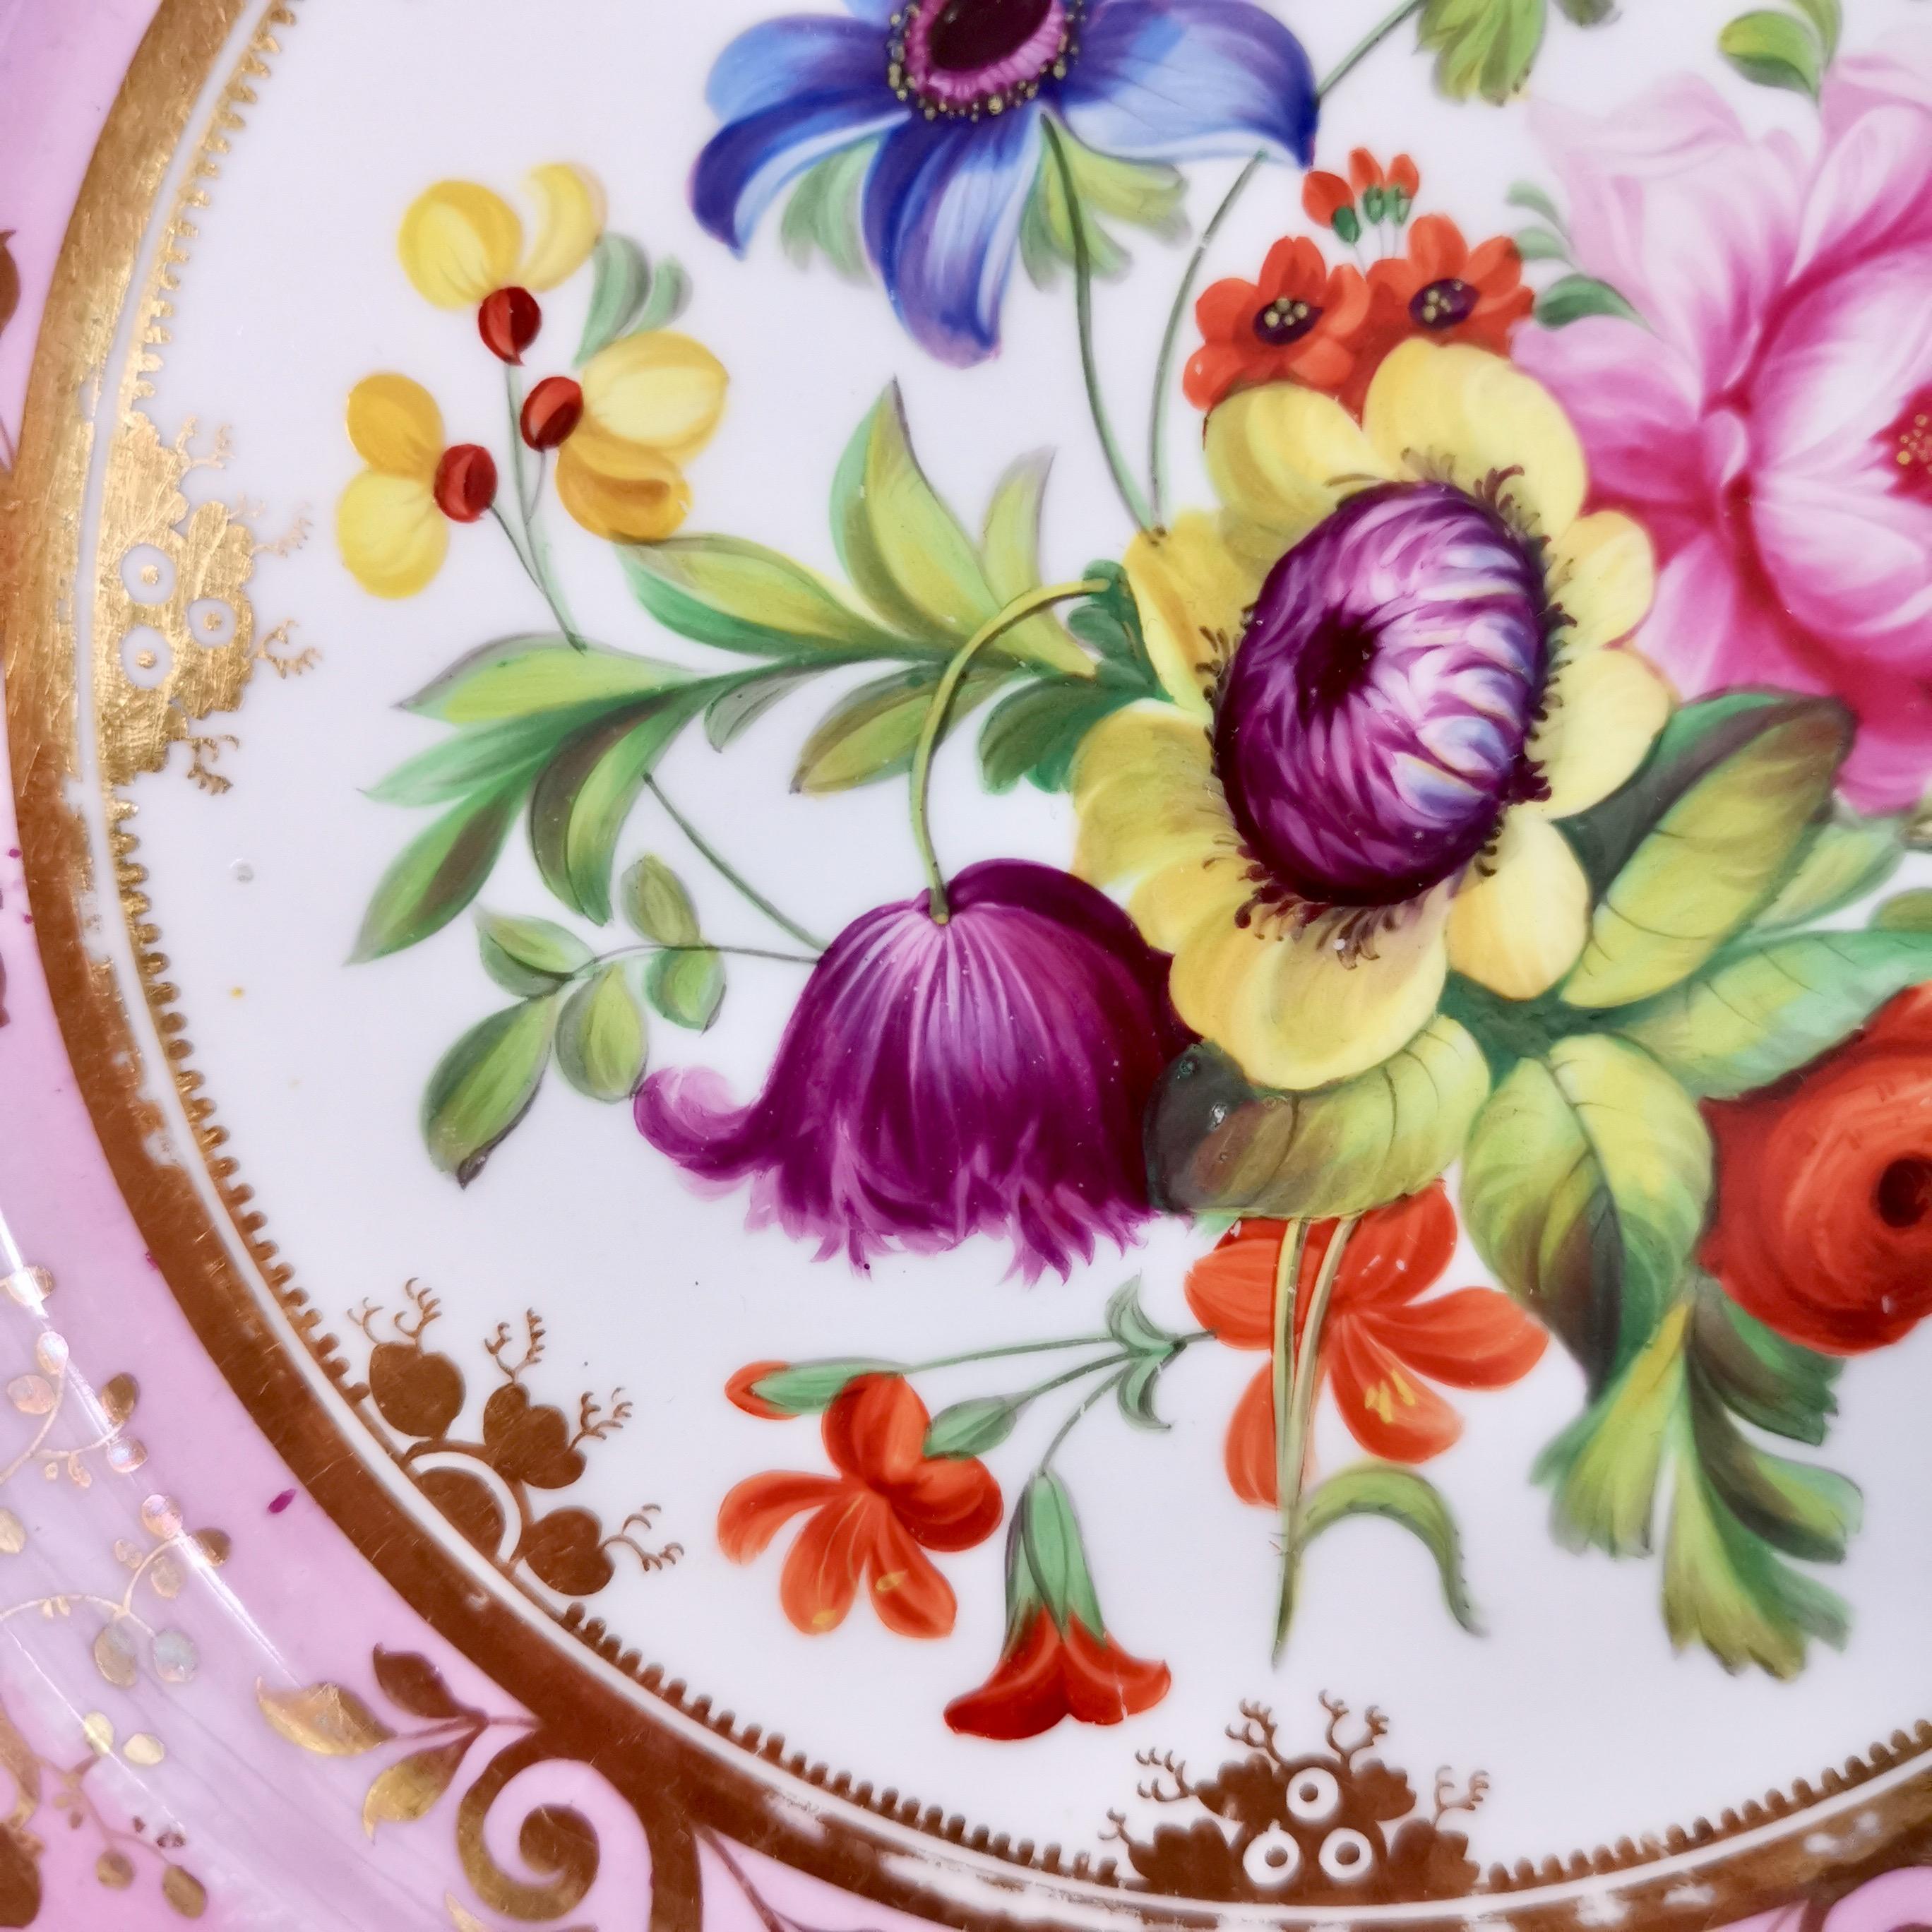 Hand-Painted Ridgway Porcelain Plate, Mauve, Pink and Flowers, Regency, ca 1829